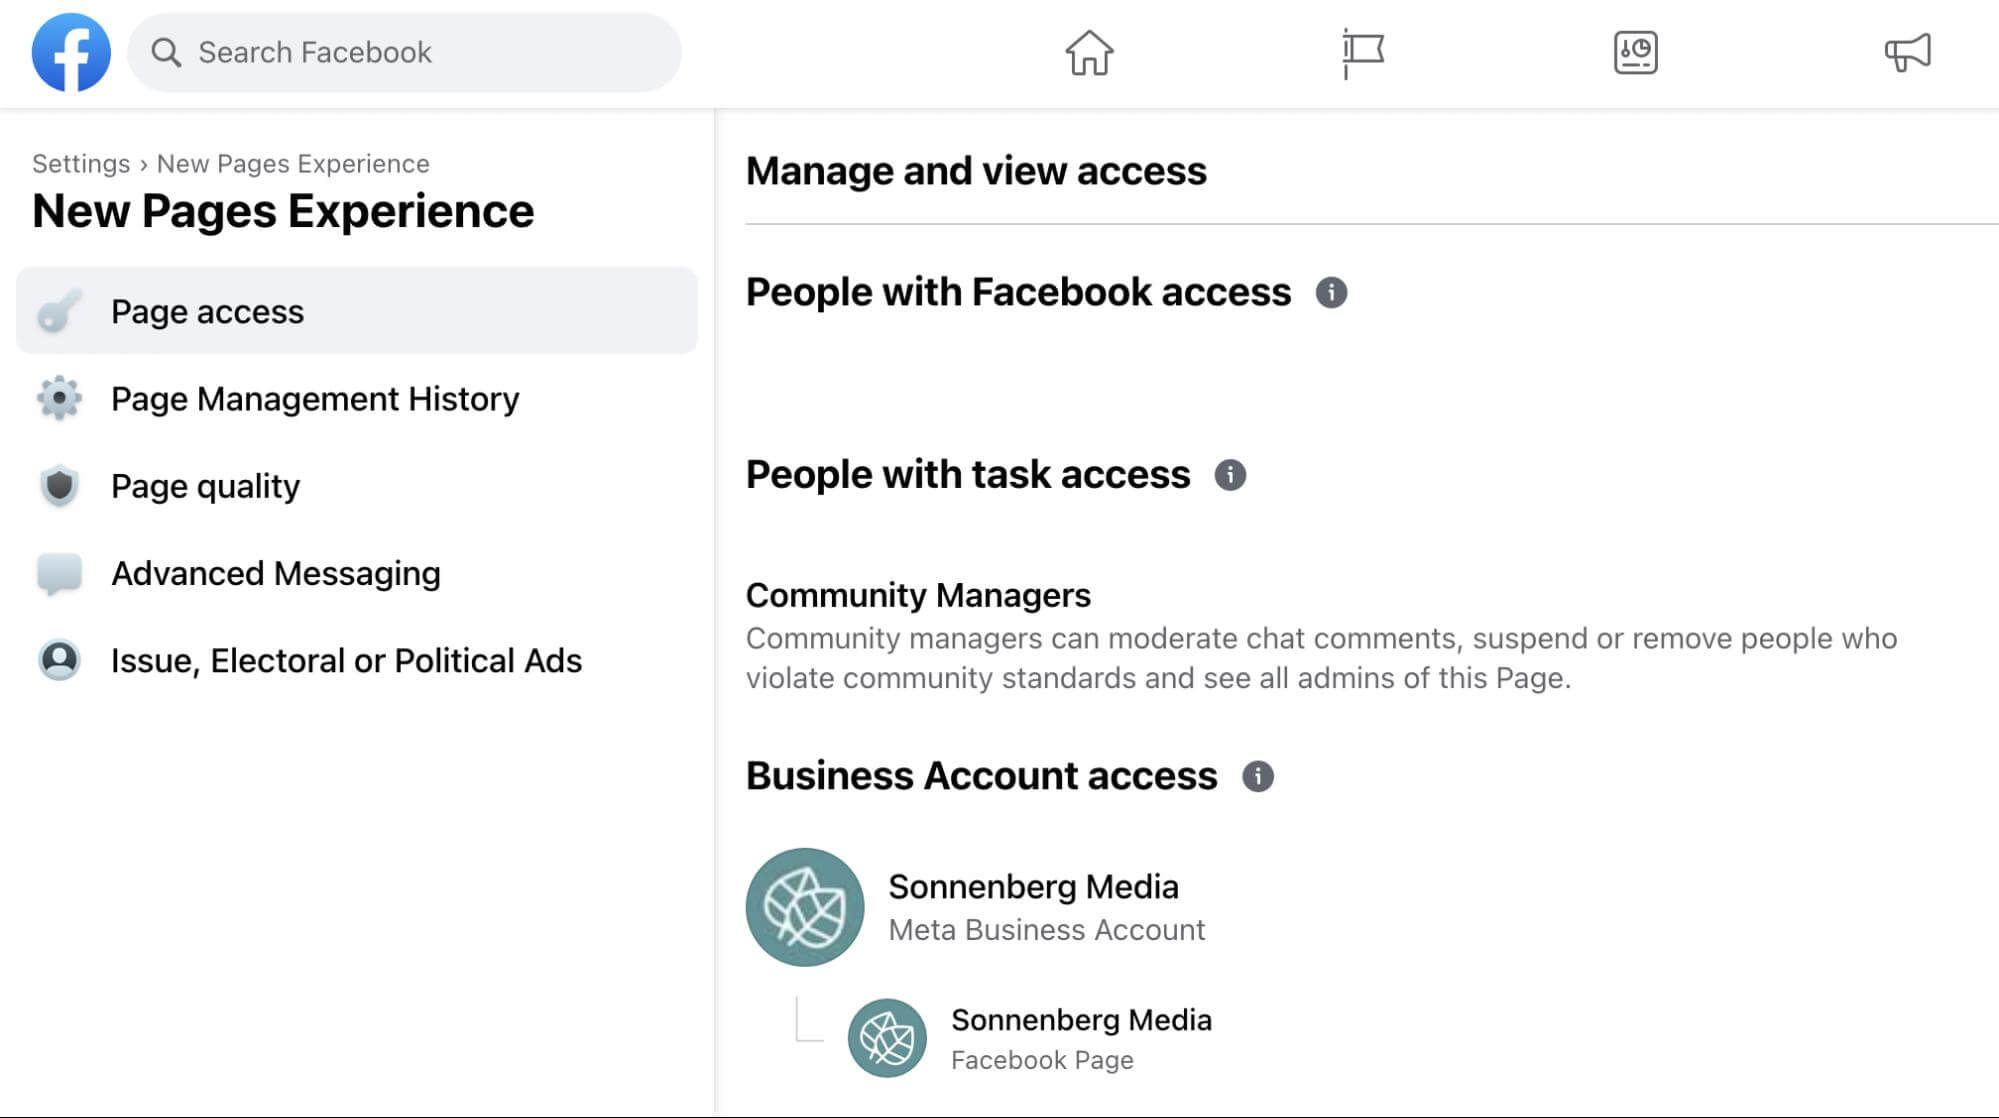 how-to-re-assign-facebook-page-and-task-access-for-your-team-in-the-new-pages-experience-for-facebook-settings-page-access-people-business-managers-manage-access-example-6